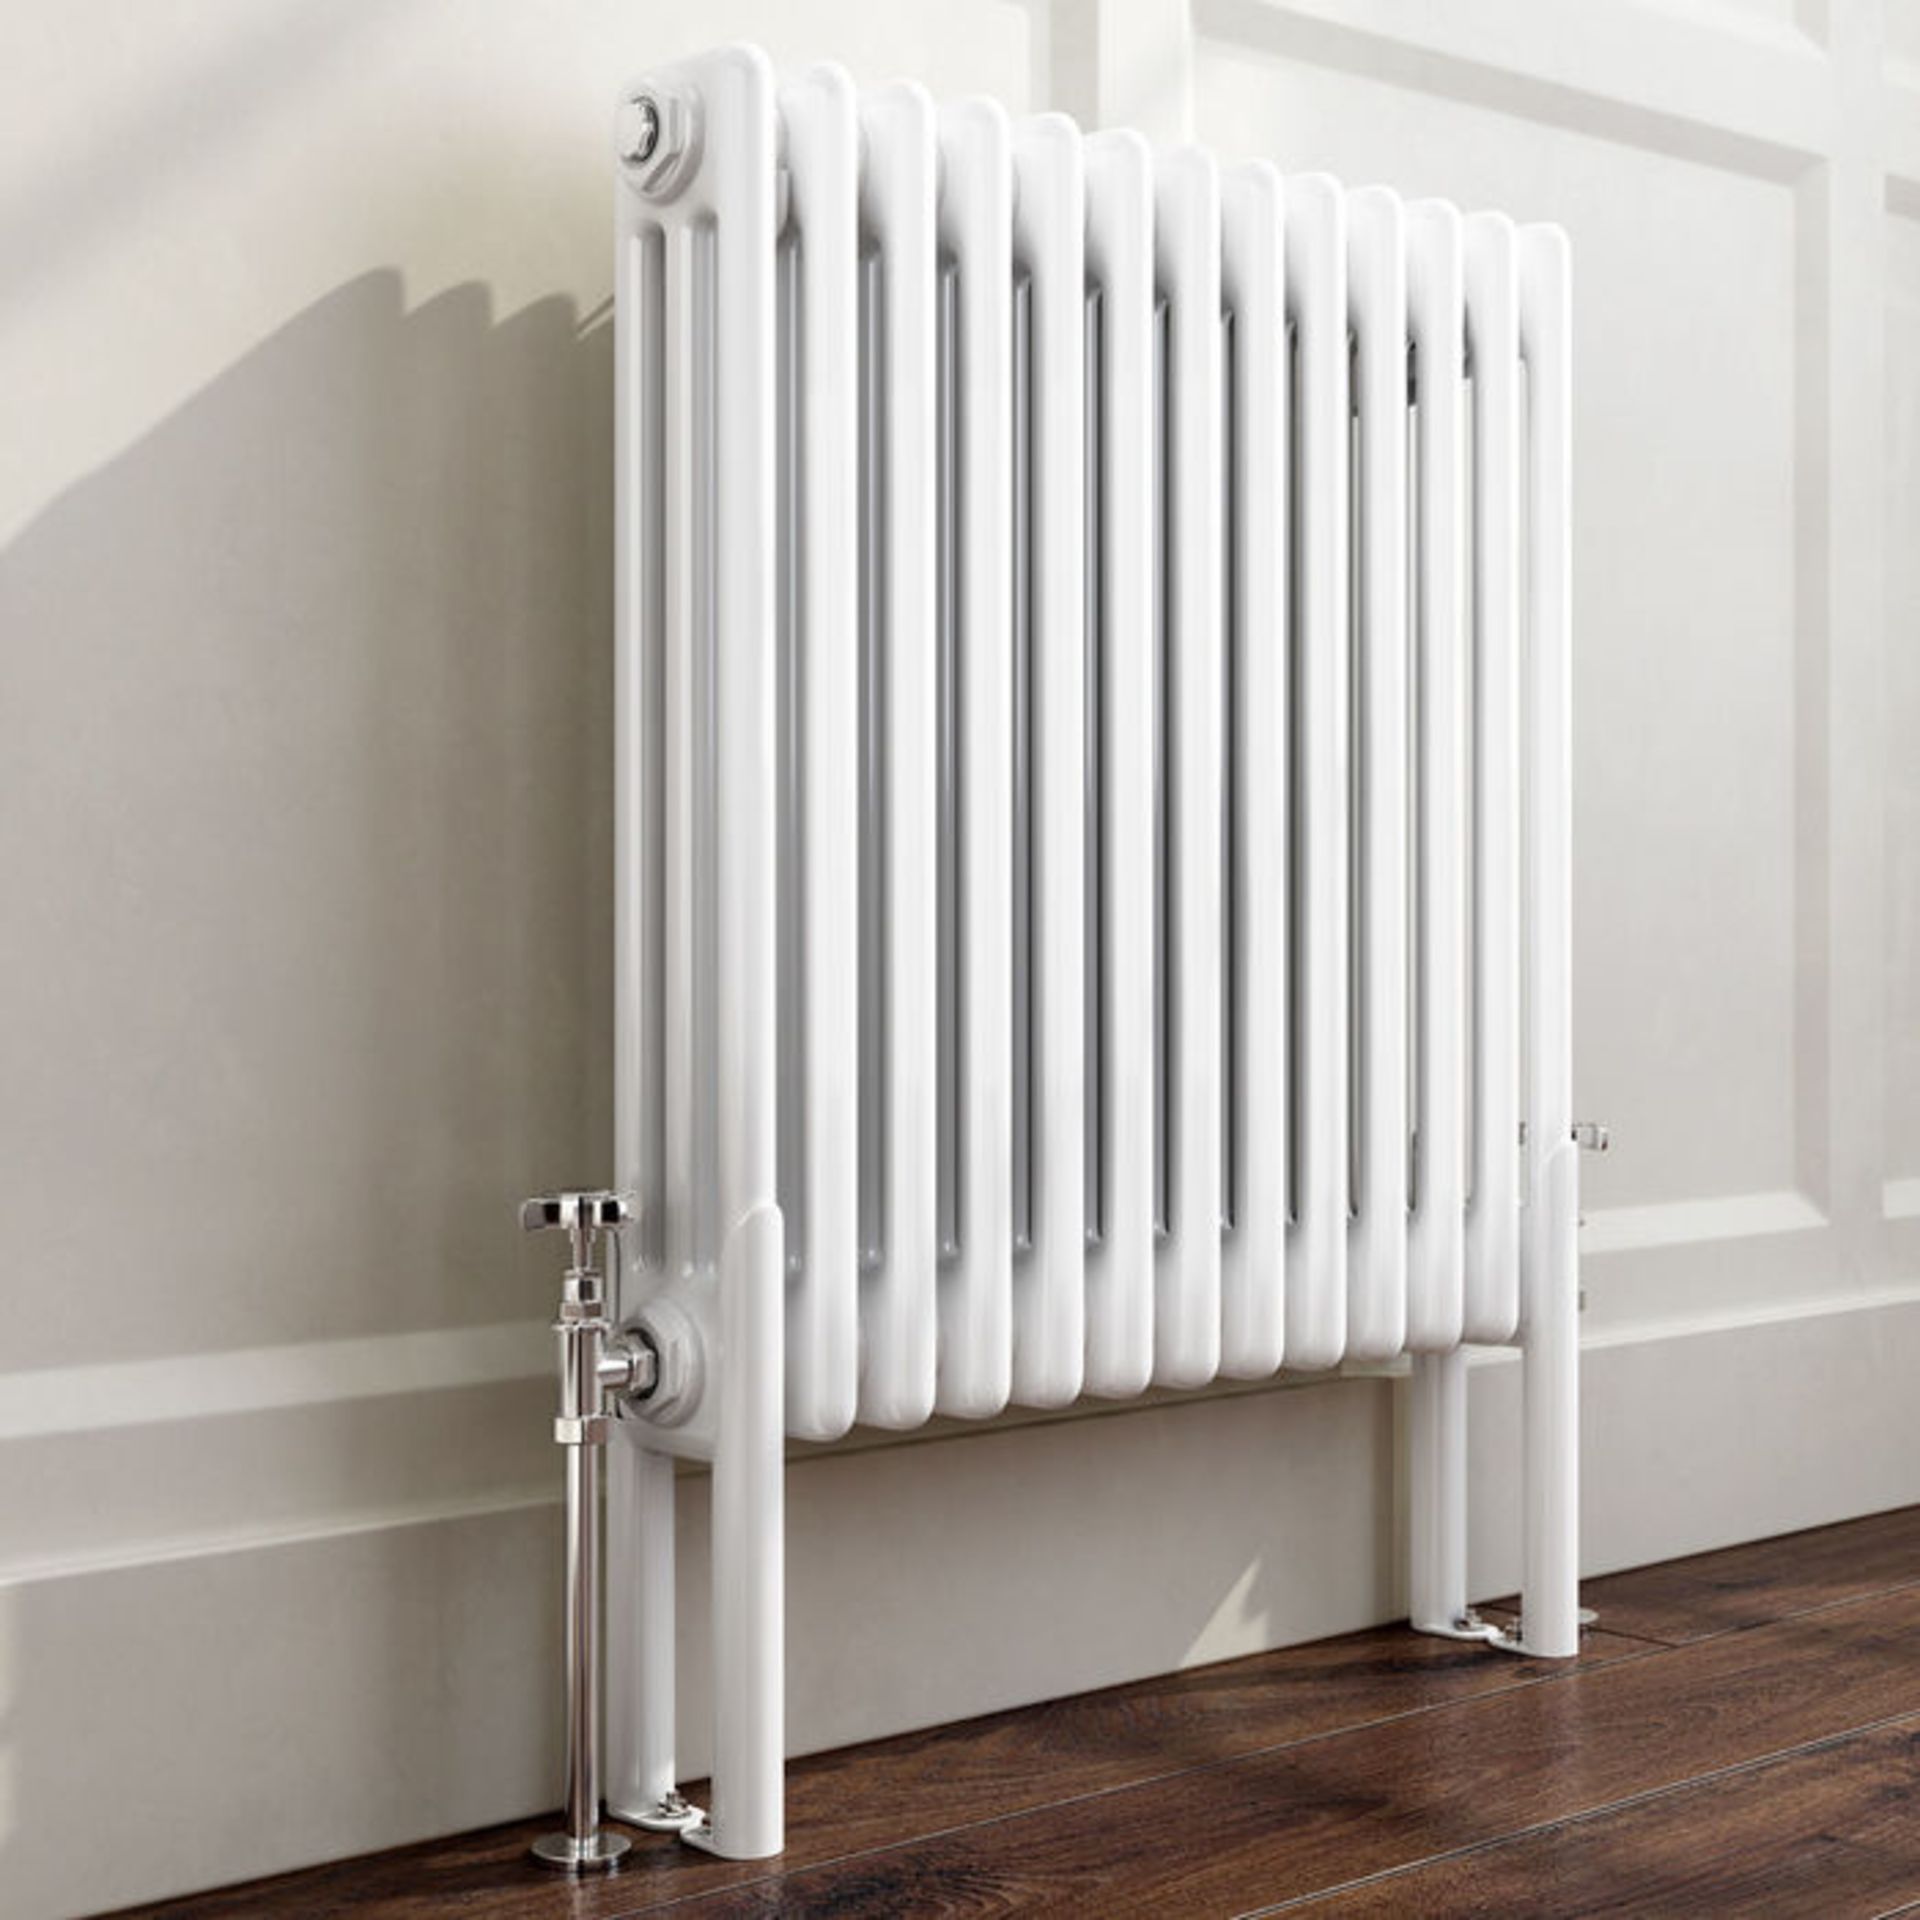 (AL110) 300x72 - Wall Mounting Feet For 3 Bar Radiators - White Can be used to floor mount radiators - Image 2 of 2